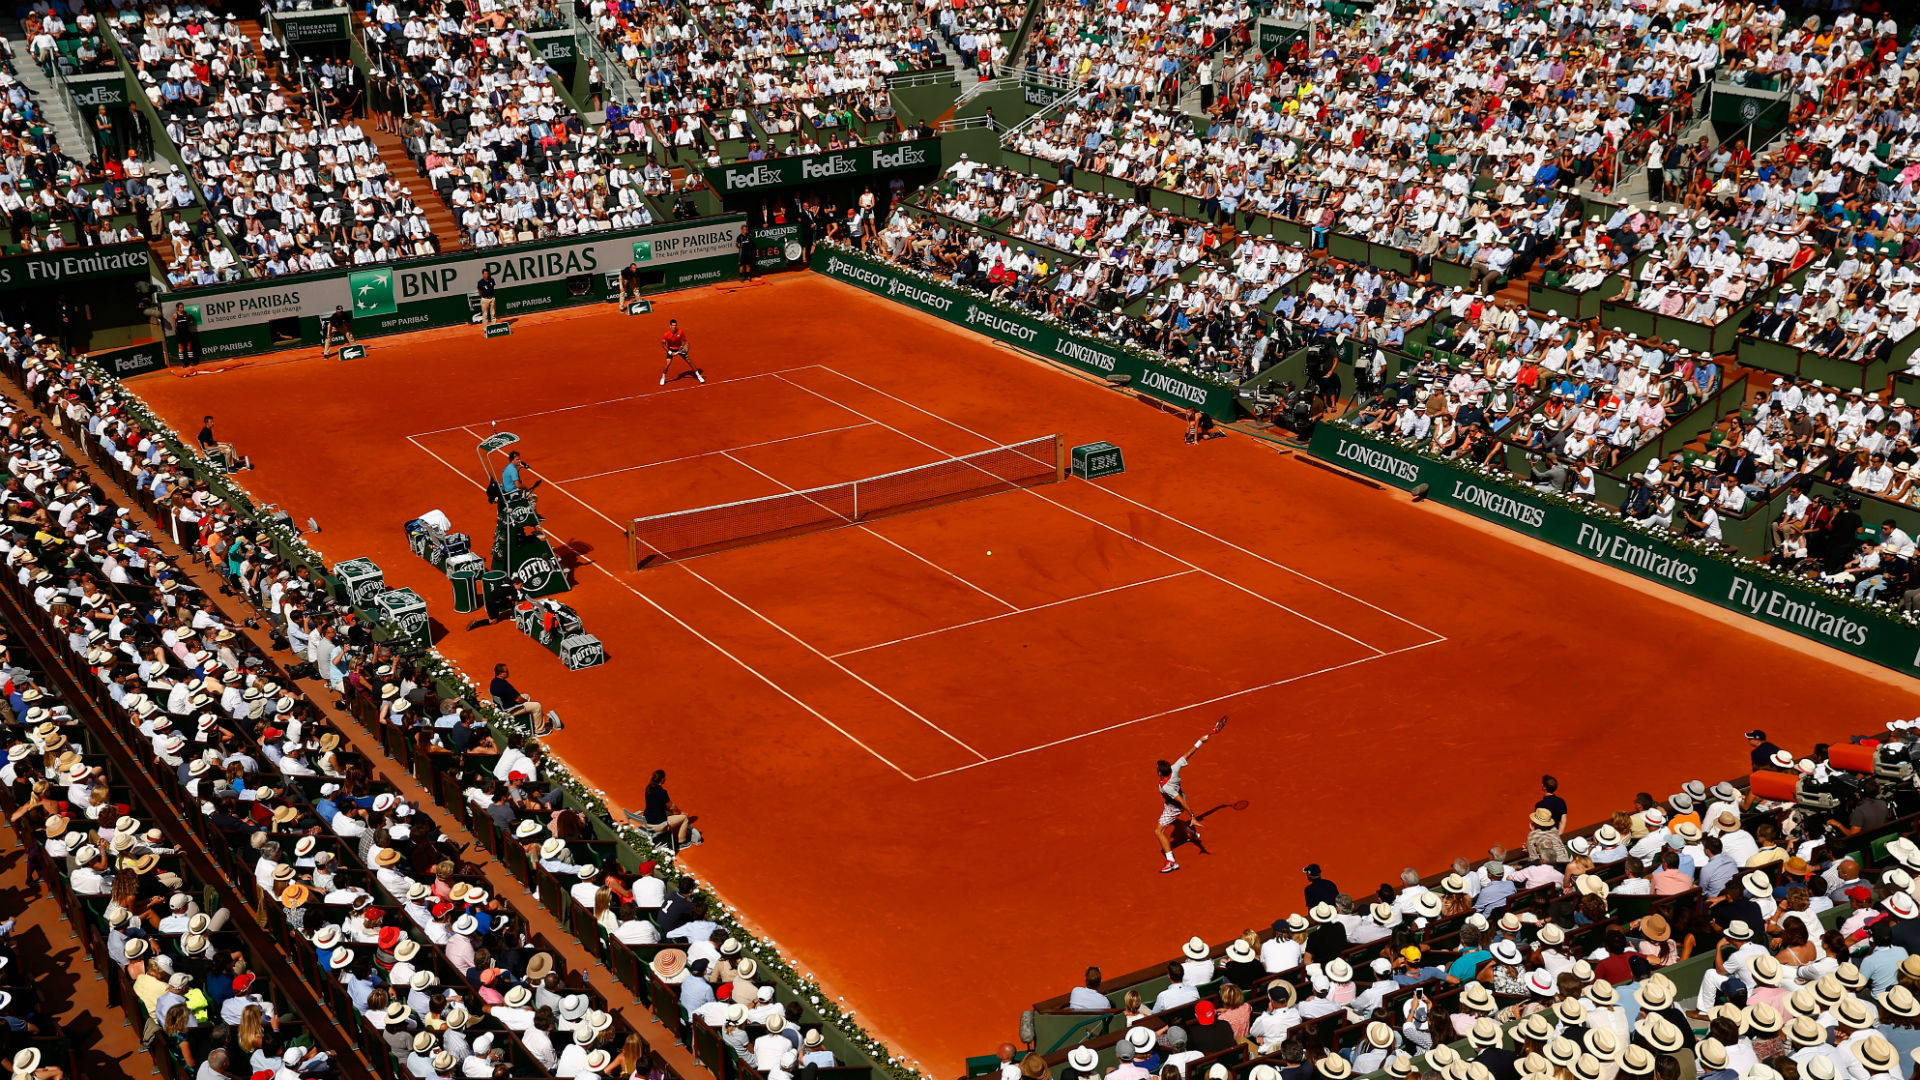 French Open 2017: Results, schedule, how to watch live at Roland Garros